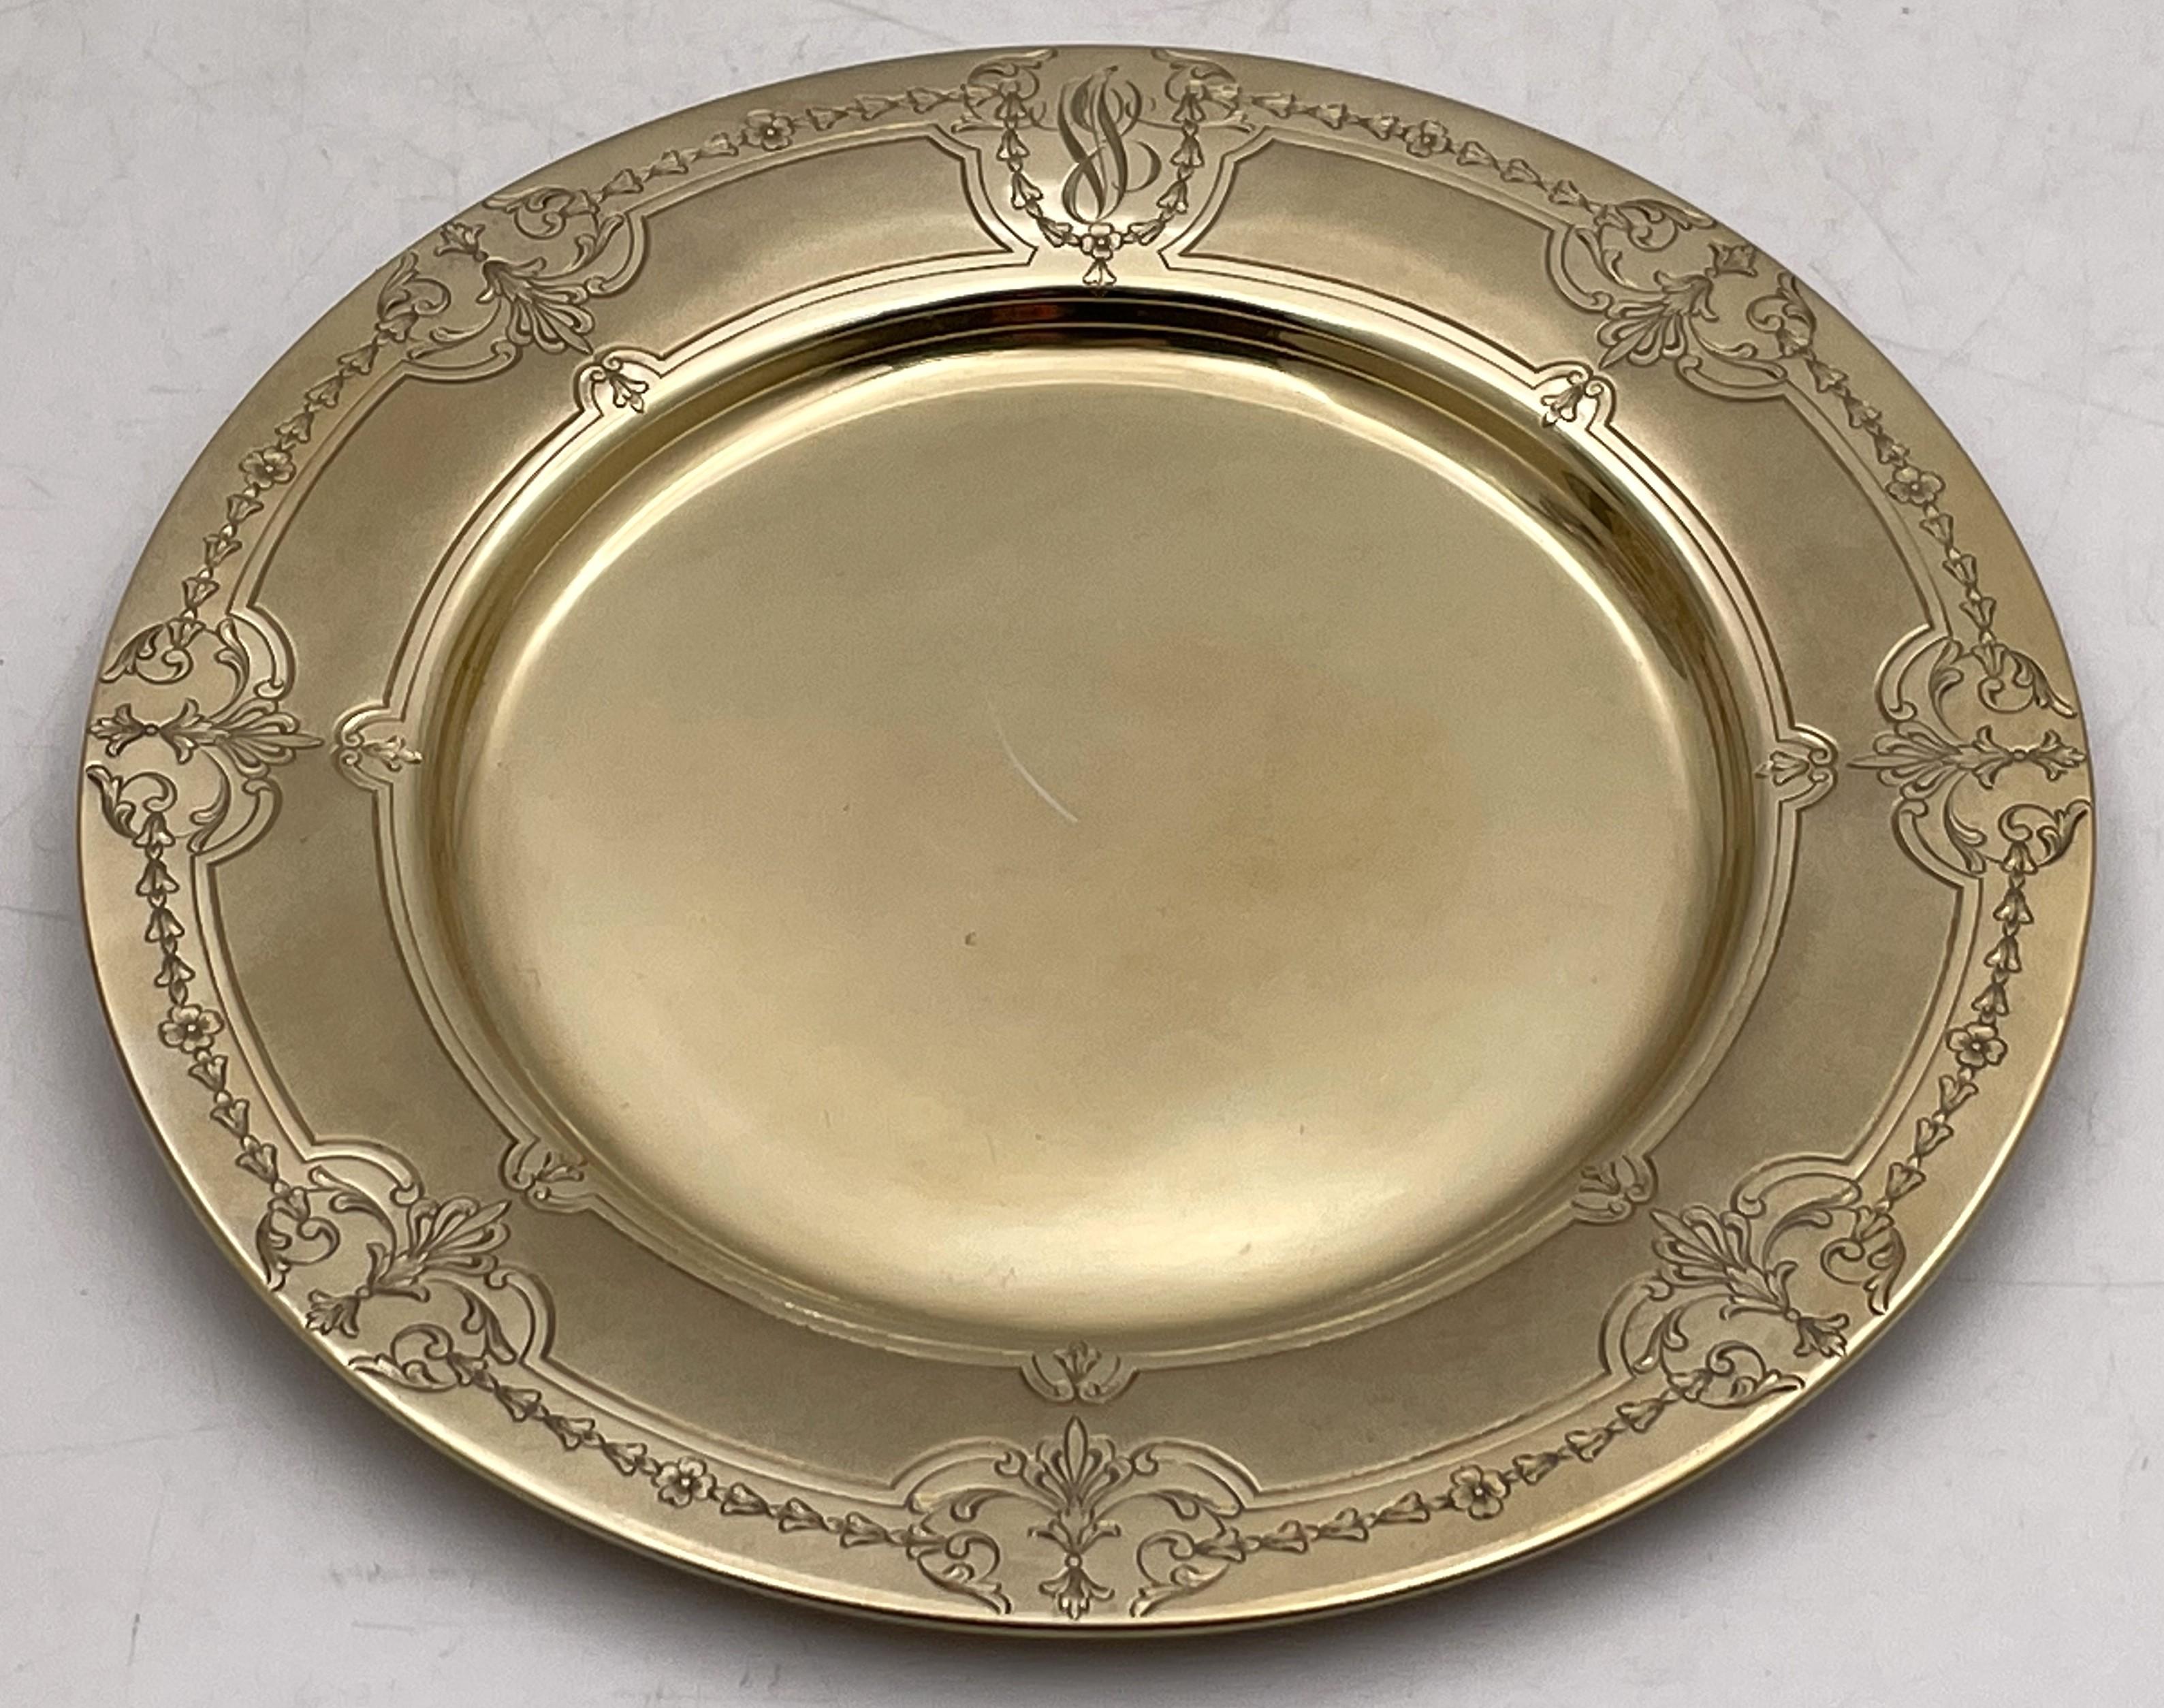 Towle, set of 15 gilt sterling silver dessert or bread plates from the early 20th century, beautifully adorned with ornate and stylized curvilinear motifs. They measure 6 1/4'' in diameter by 2/5'' in height, weigh 56 troy ounces, and bear hallmarks